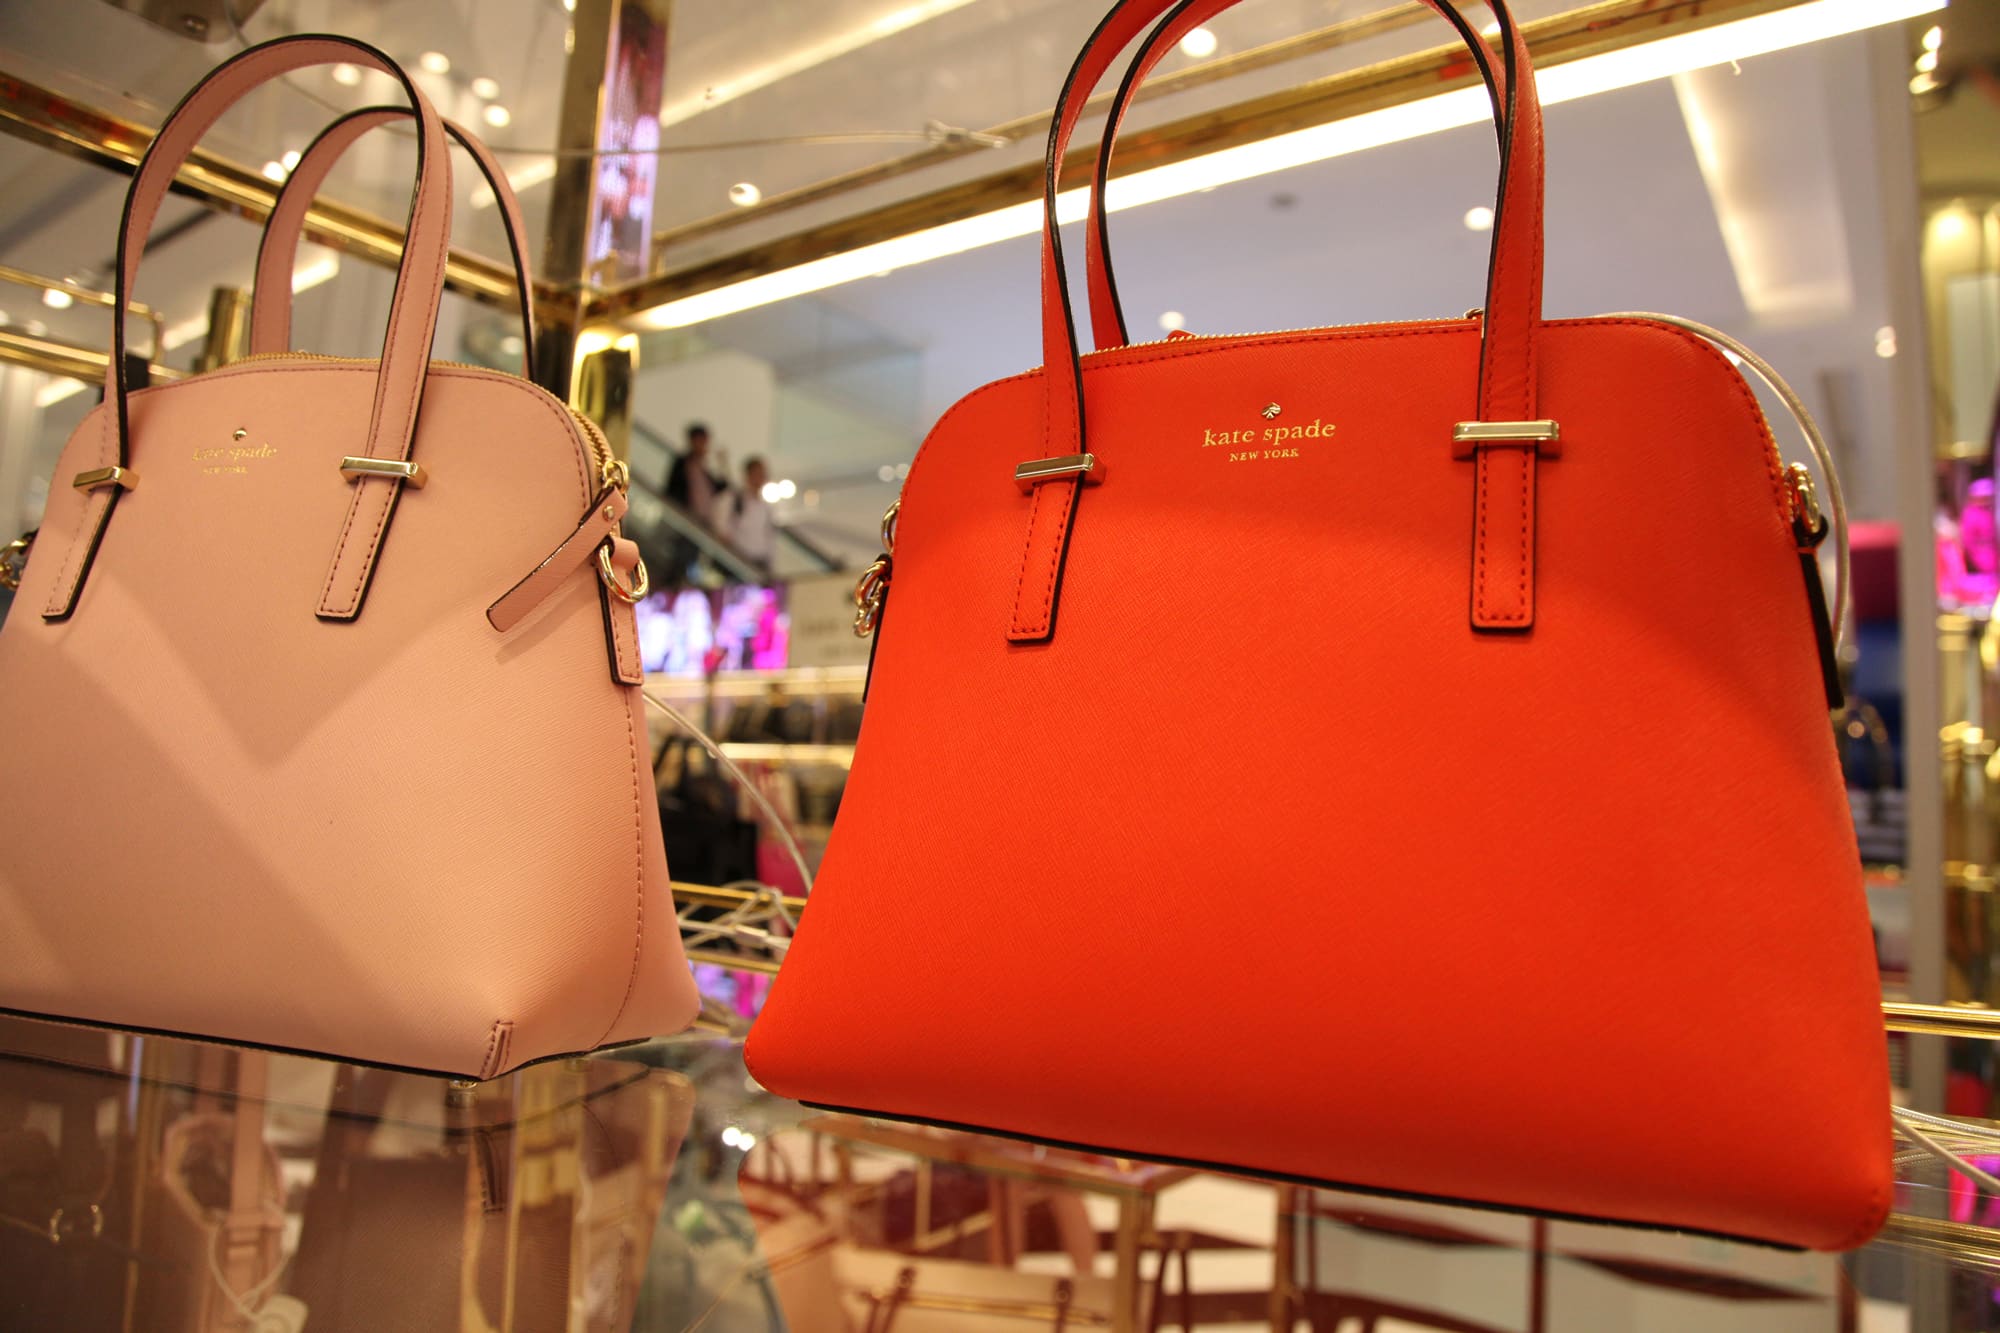 Kate Spade shares plunge 20 percent as growth abruptly slows